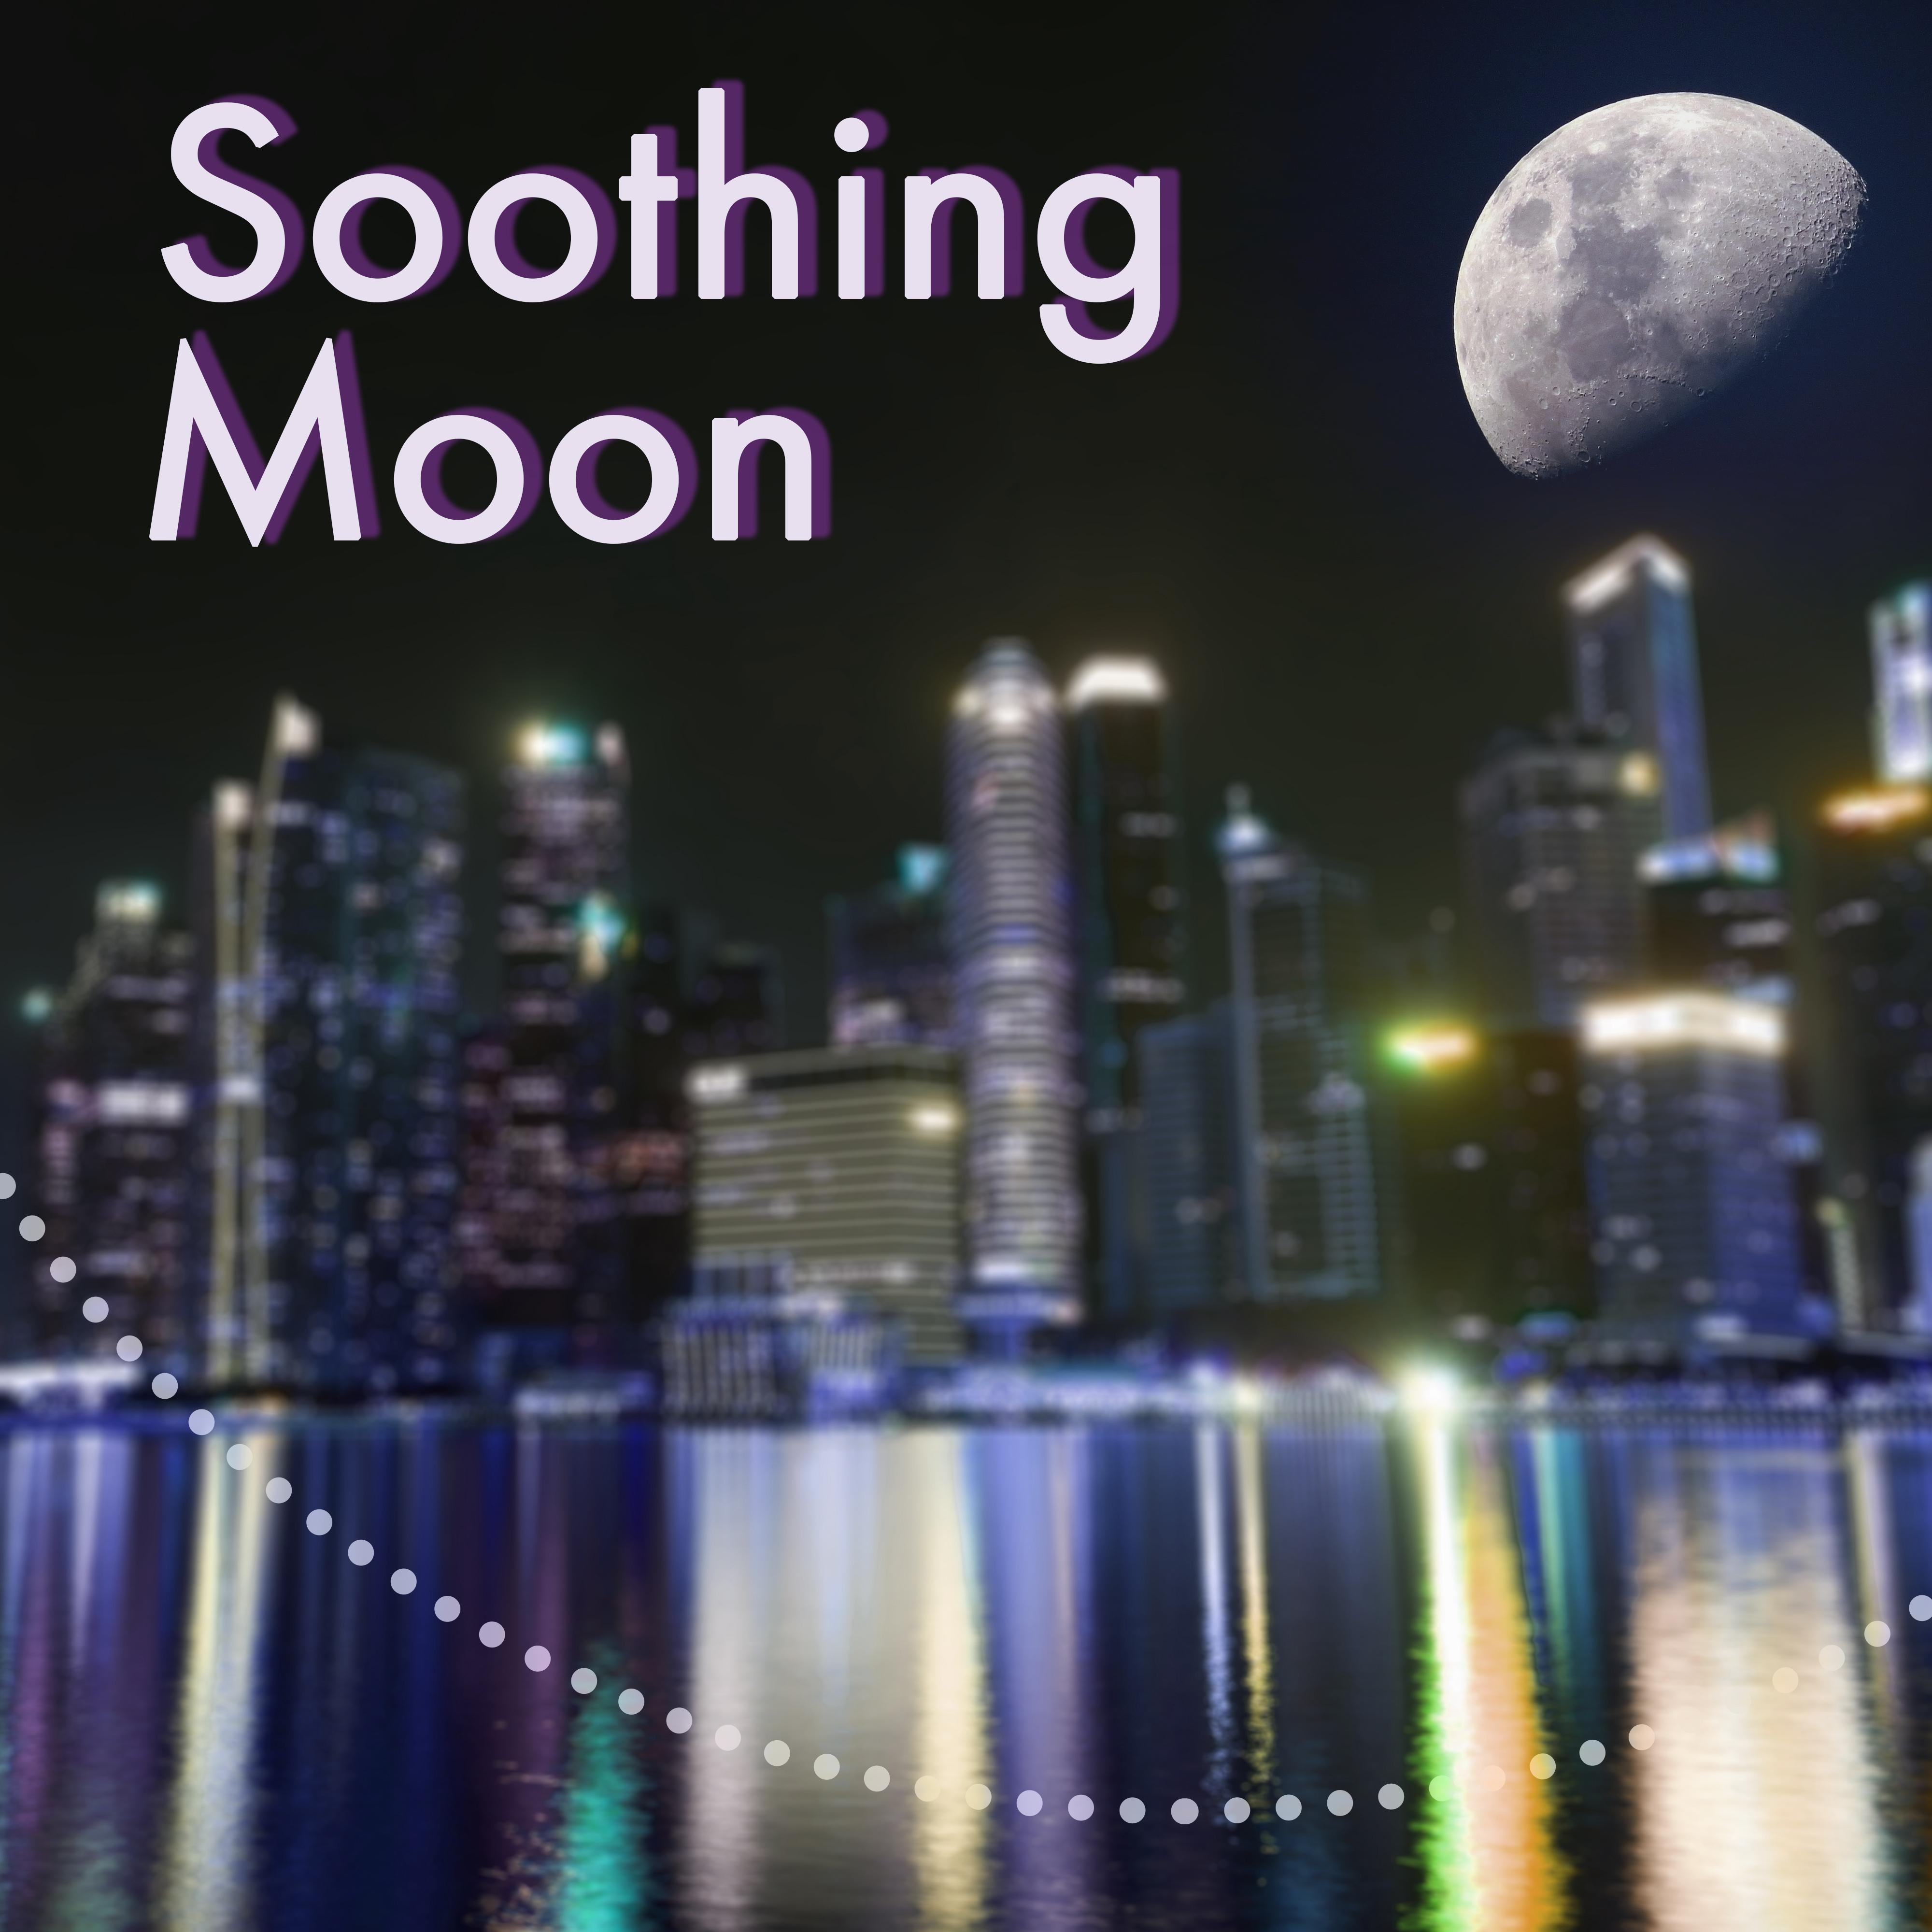 Soothing Moon  Night Sounds, Smooth Jazz, Relaxation Music, Chillout, Guitar Jazz, Mellow Songs